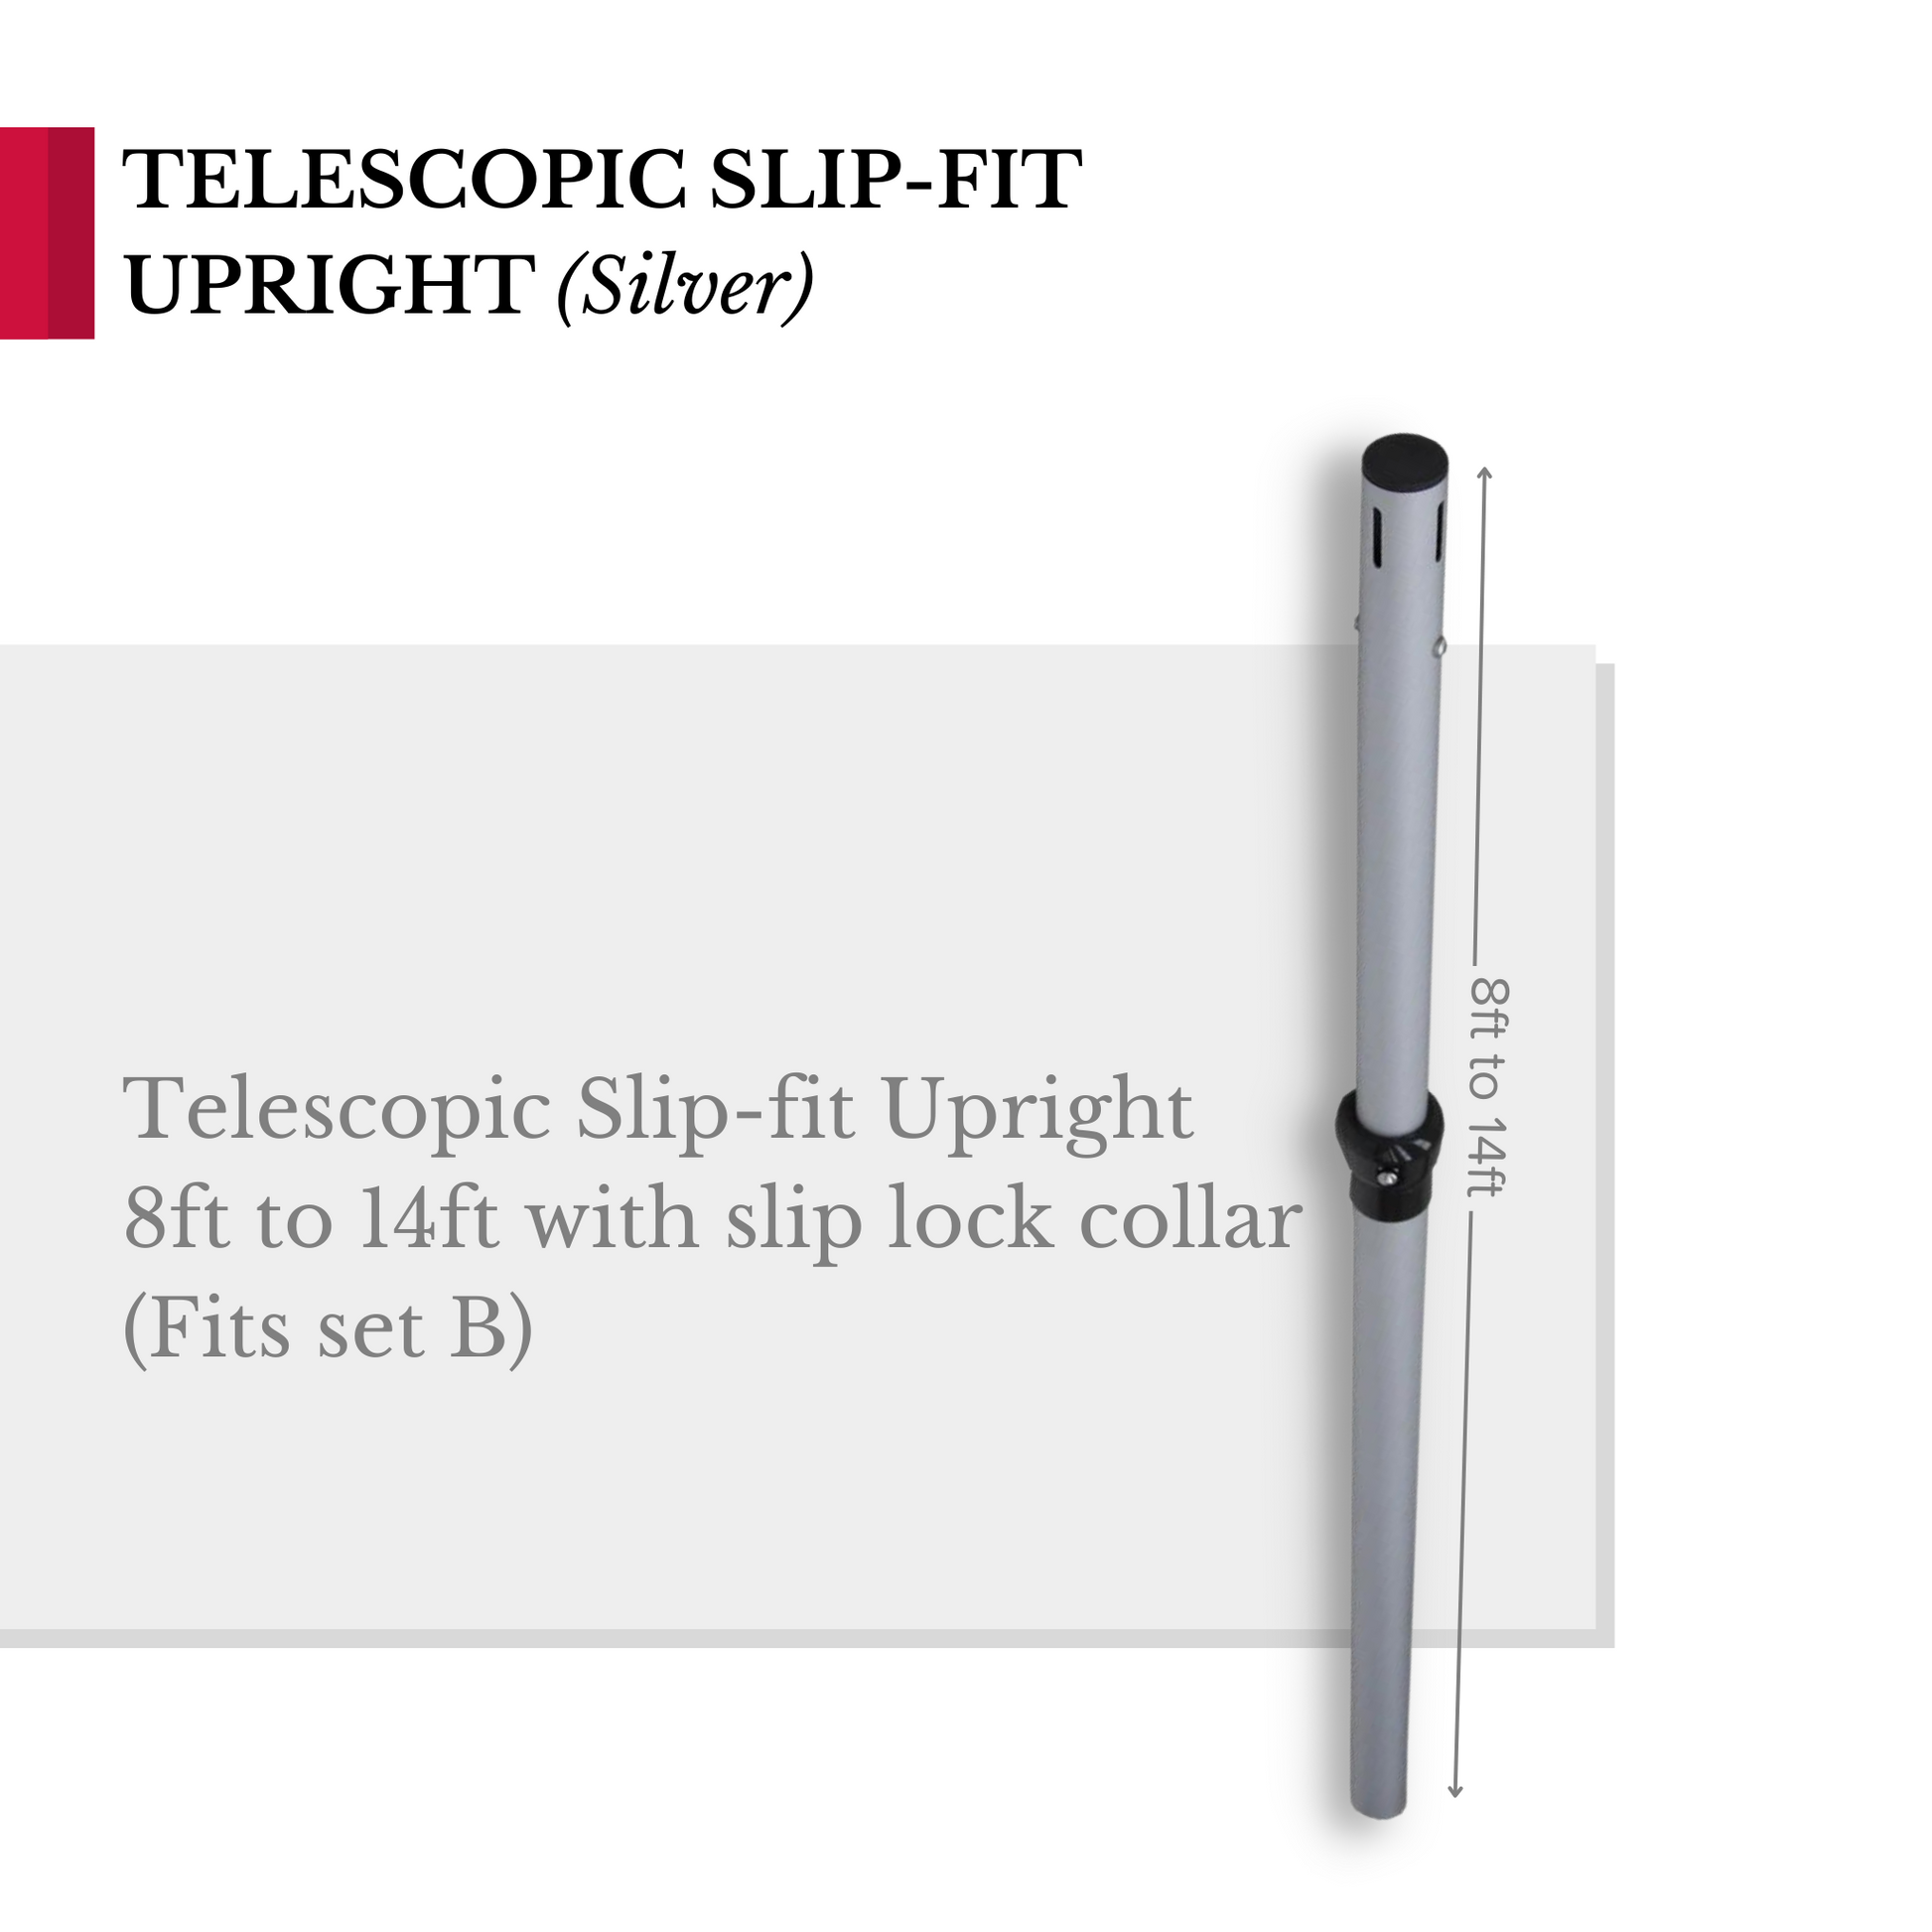 Telescopic Slip-fit Upright 8ft to 14ft with slip lock collar (Fits set B)